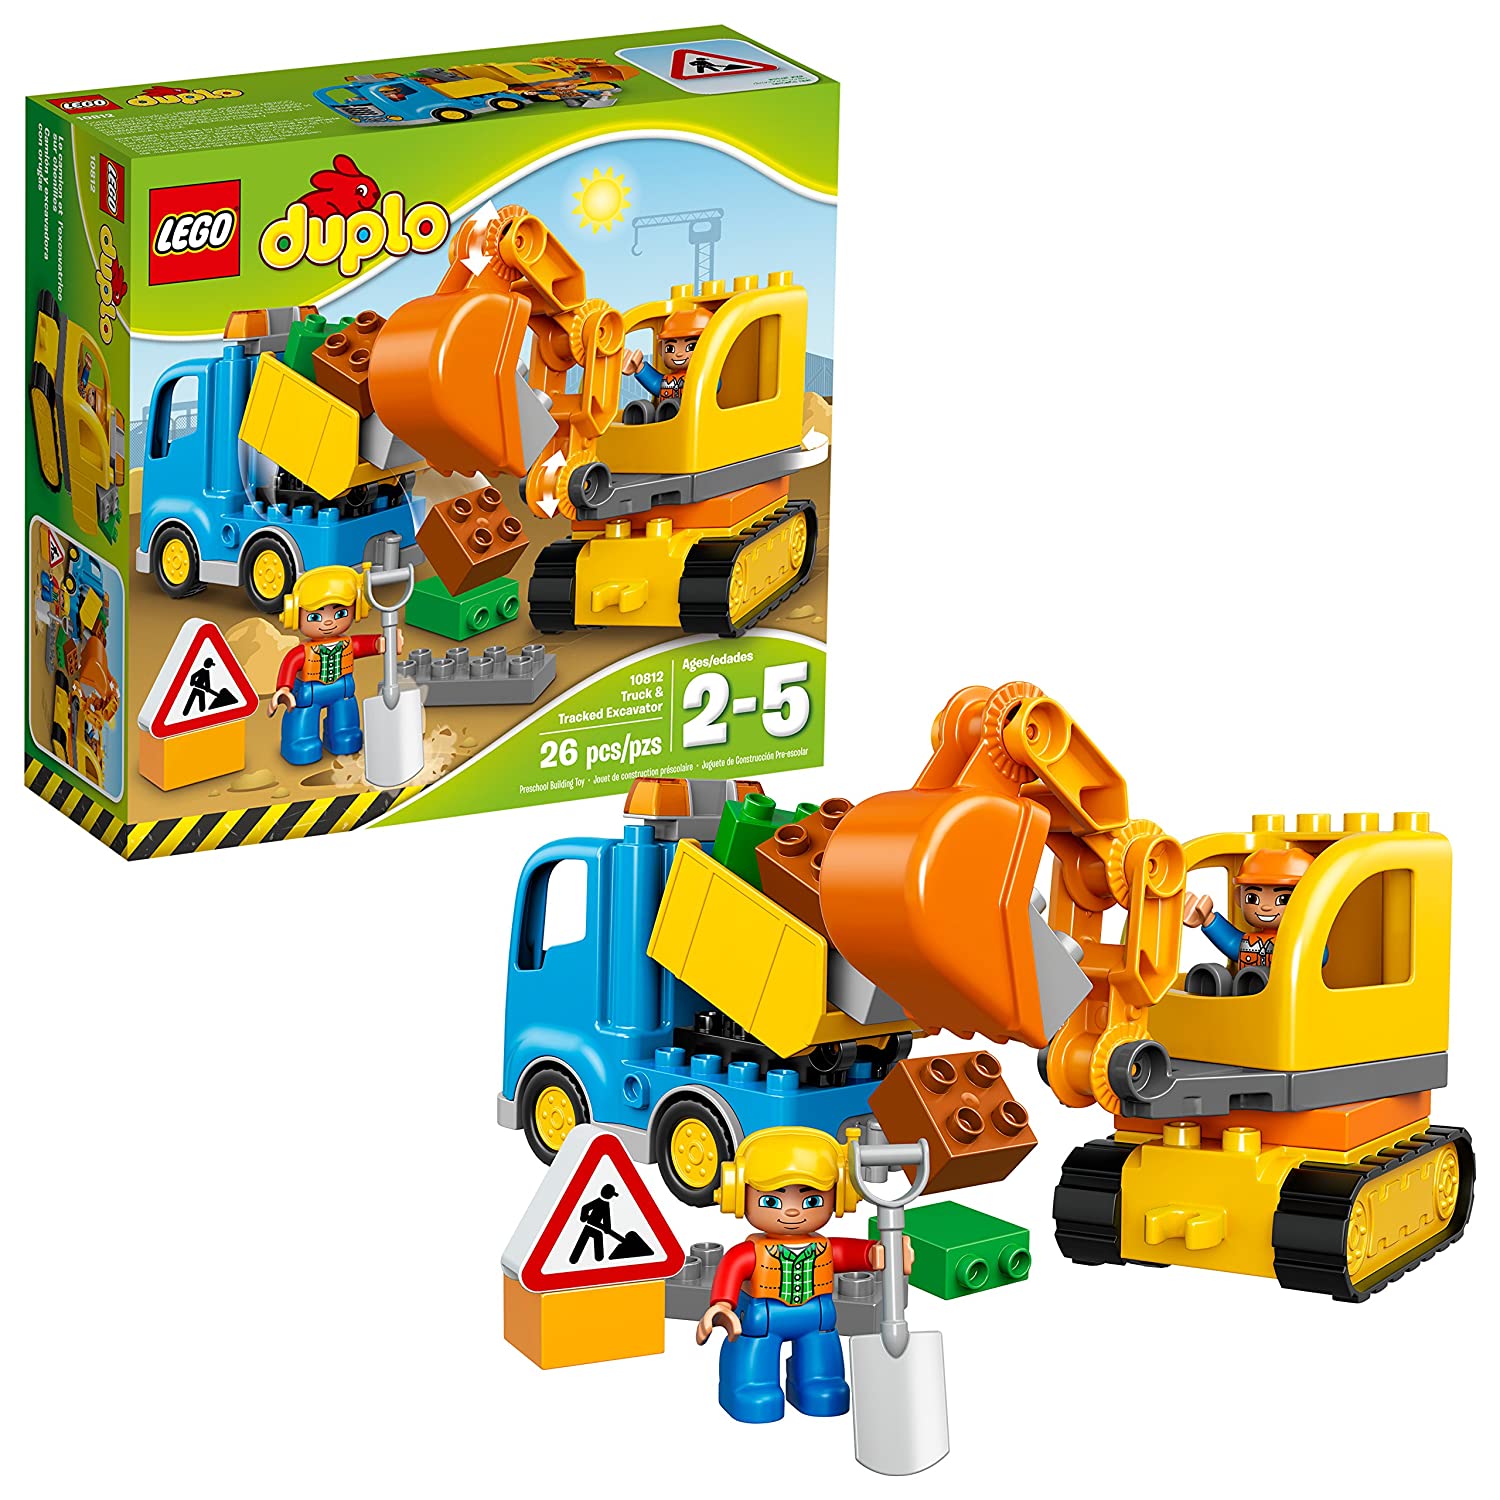 LEGO DUPLO Town Truck & Tracked Excavator 10812 Dump Truck and Excavator Kids Construction Toy